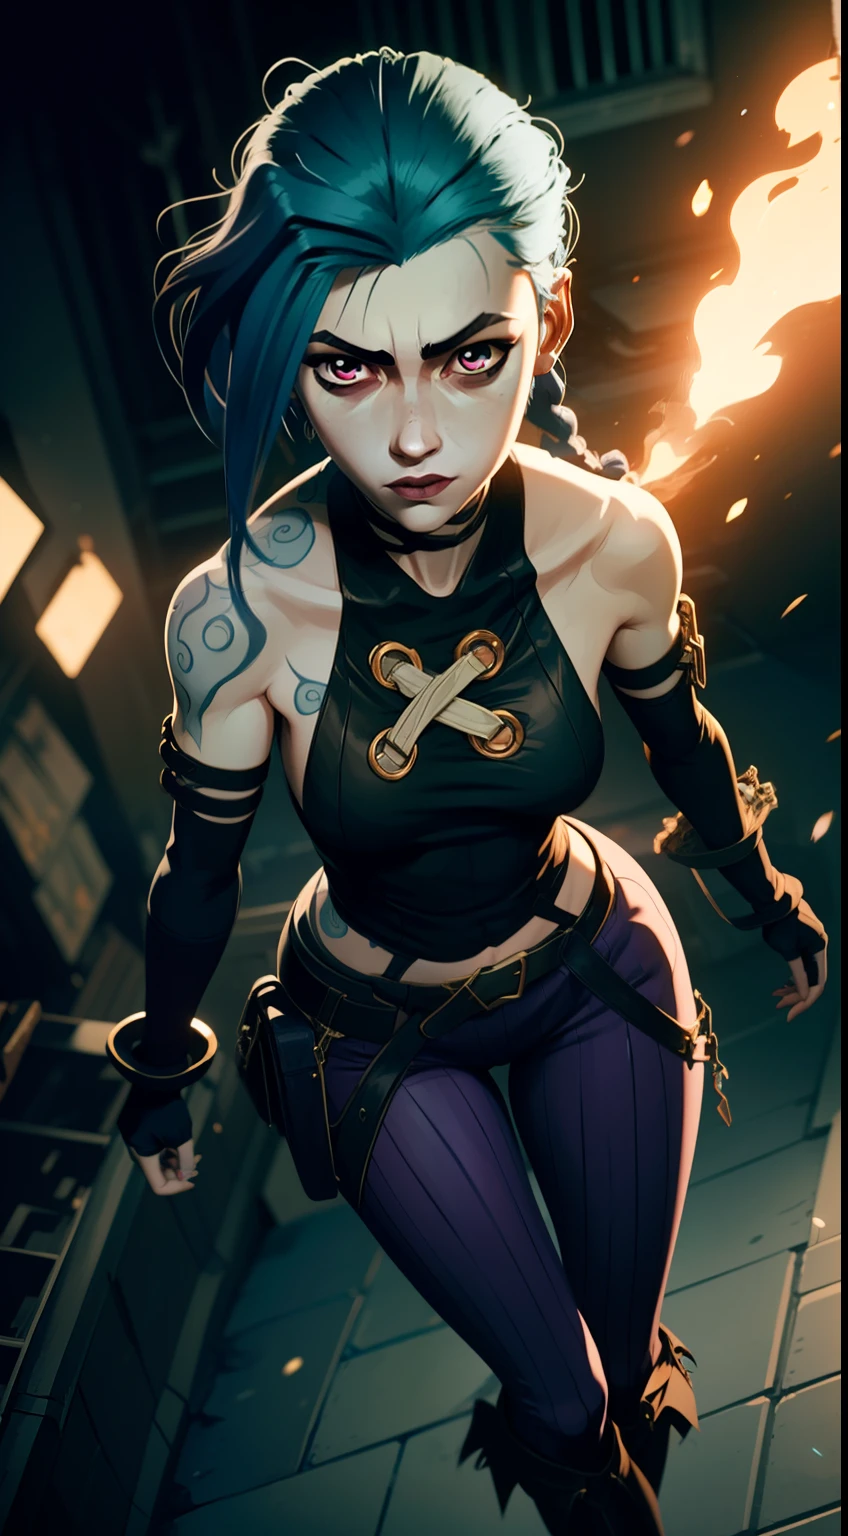 Overhead view, The camera looks at Jinx from above, Like in a computer game, Jinx's character design, Dynamic movements, Standing Half-Sideways, stands on the edge of the roof, Fantasy City, City of Piltover, the night, explosions, fire, Smoke, sparks, Purple Flashes, sexypose, Beautiful figure, Arcane's Jinx, Bright blue and purple sparks all around, glowing eyes, Pink glowing eyes, hairlong, hairsh, braided into long braids, Pigtails hang below the knee, Hair color changes from bright blue to navy blue, Dressed in brown breeches, Leather boots on the feet, Top with four gold circles on the chest in the middle of the chest, Blue cloud tattoos on shoulders and waist, Long bangs, hanging on the right side, Belt with cartridges on the belt, Arcane style, extremely detailed CG unity 8k wallpaper, detailed light, Cinematic lighting, chromatic aberration, glittering, expressionless, epic composition, dark in the background, Cherecter Desing, Very detailed, Detailed body, Vibrants, Detailed Face, sharp-focus, anime art, Vibrants, Detailed Face, Hugh Details, sharp-focus, Very drooping face, A detailed eye, super fine illustration, better shadow, finely detail, Beautiful detailed glow, Beautiful detailed, Extremely detailed, expressionless, epic composition,